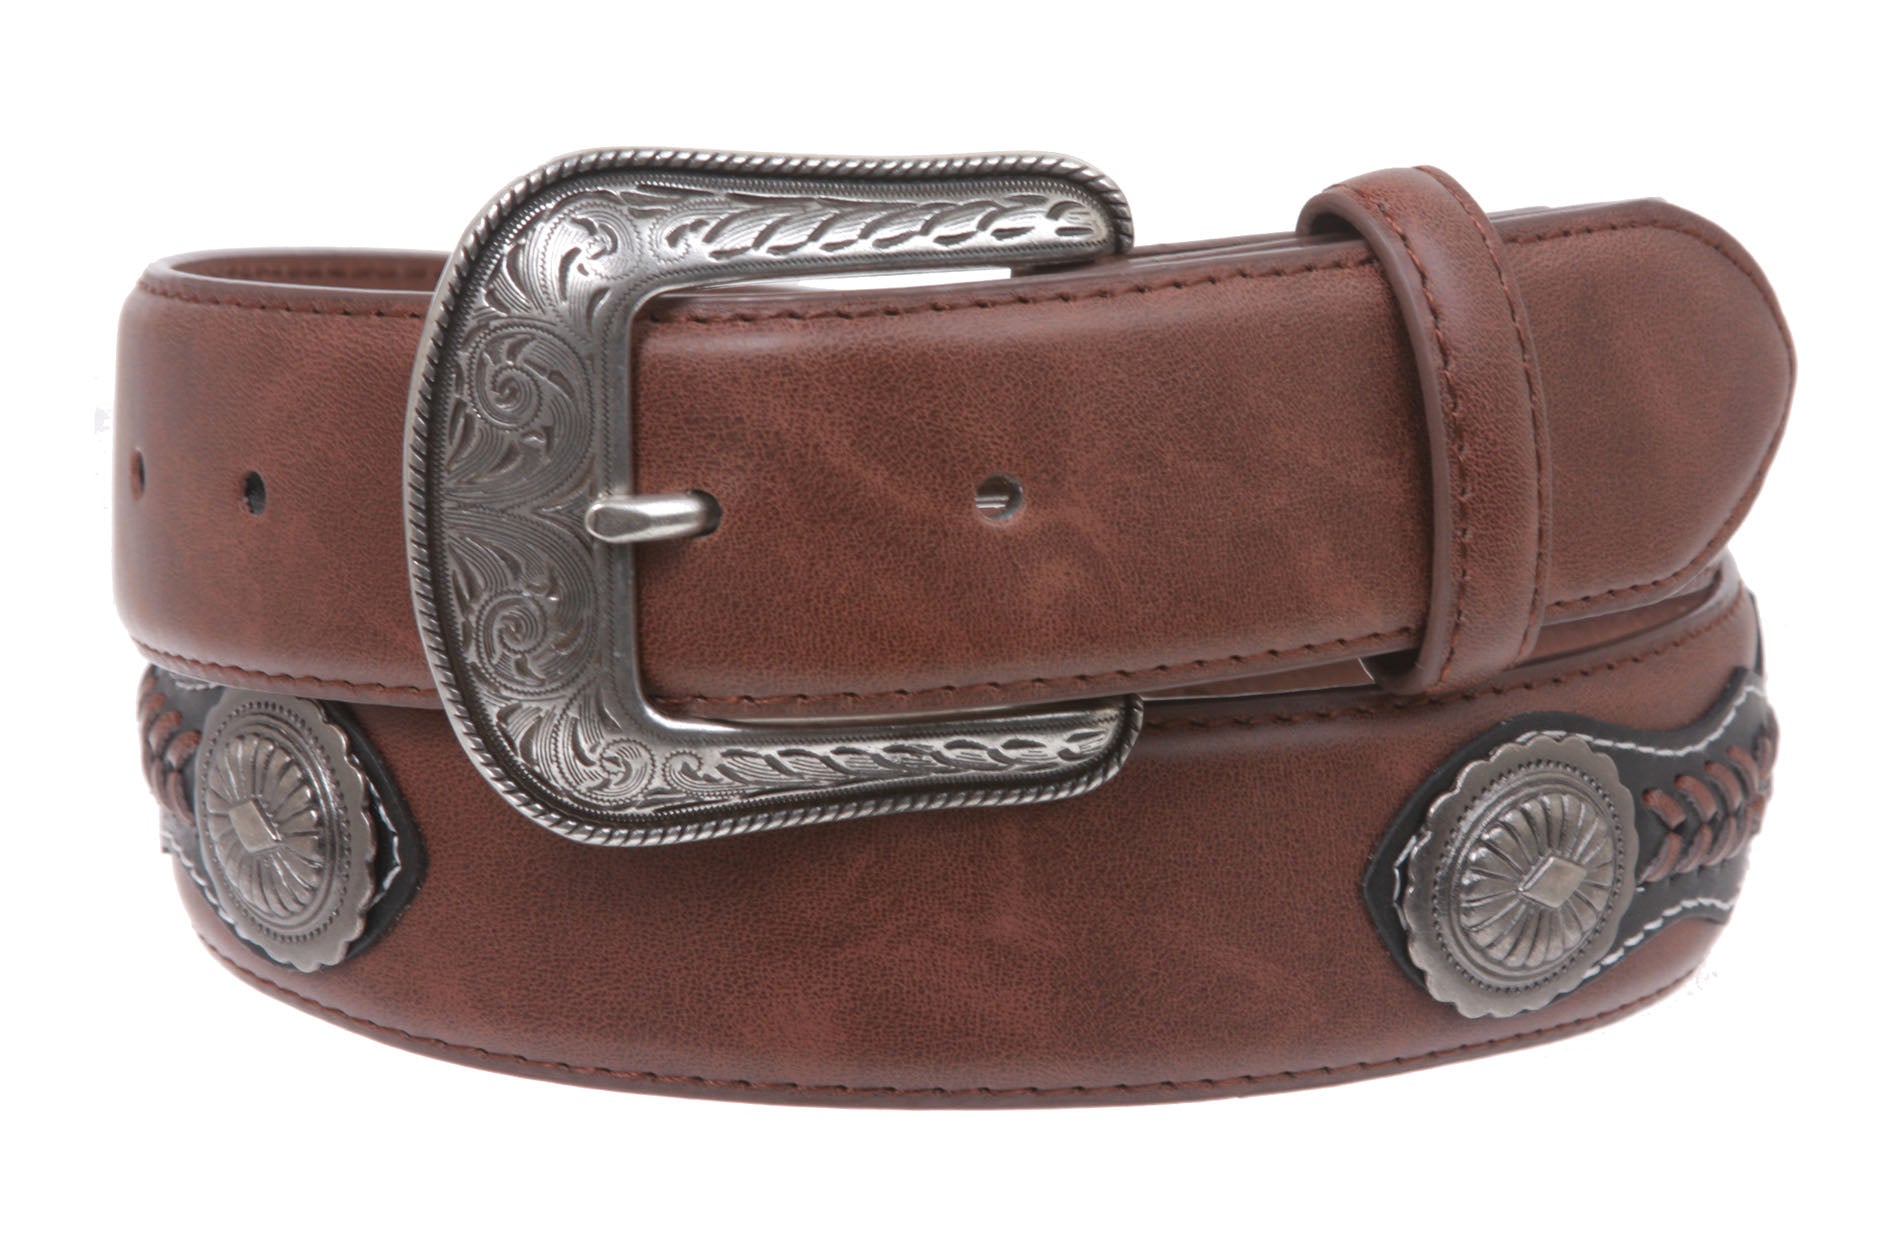 Western Embroidered Stitching-Edged Leather Belt